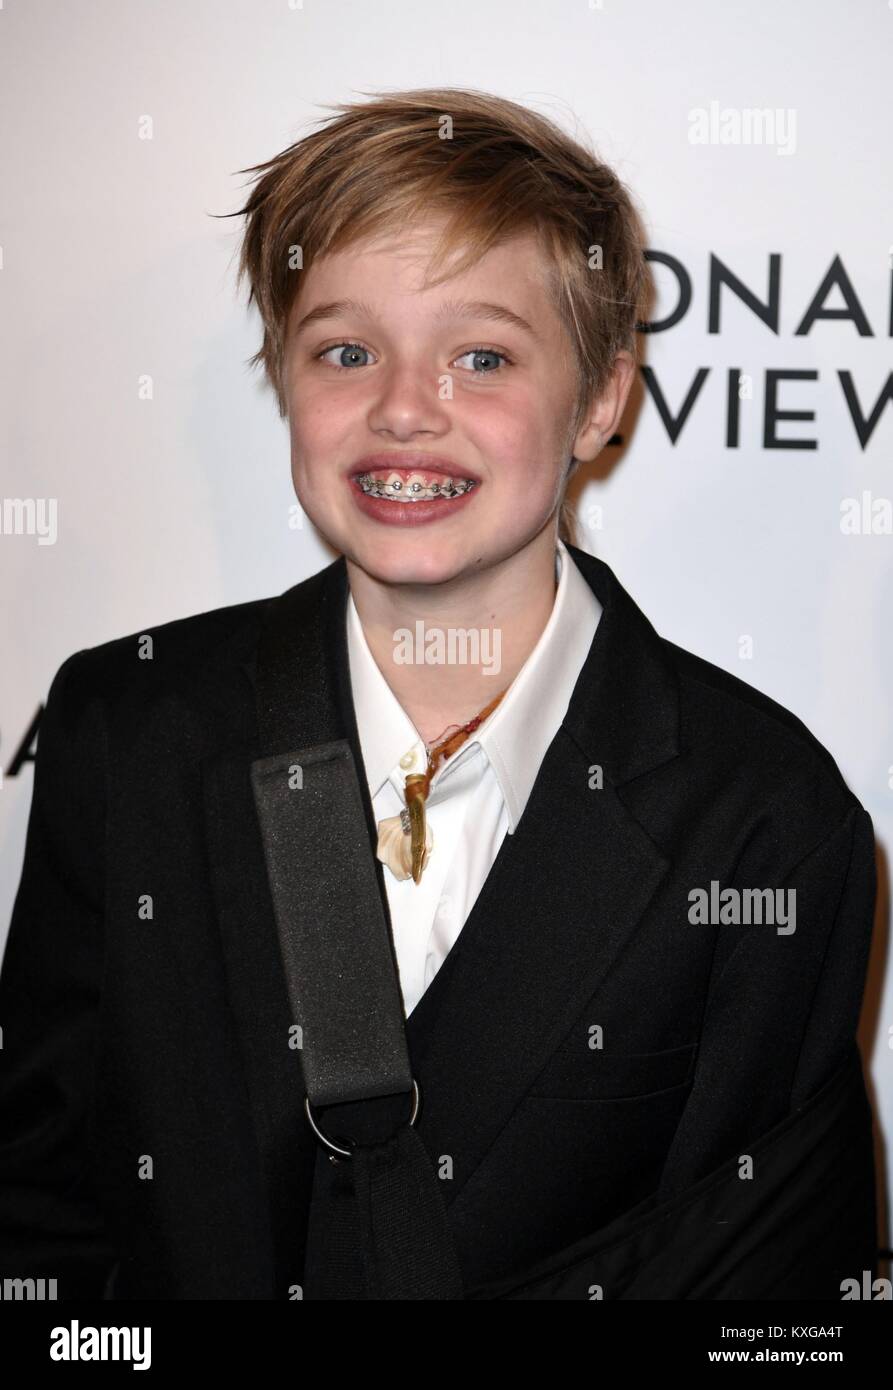 New York, NY, USA. 9th Jan, 2018. Shiloh Nouvel Jolie-Pitt at arrivals for The National Board of Review Awards 2018, Cipriani 42nd Street, New York, NY January 9, 2018. Credit: Derek Storm/Everett Collection/Alamy Live News Stock Photo